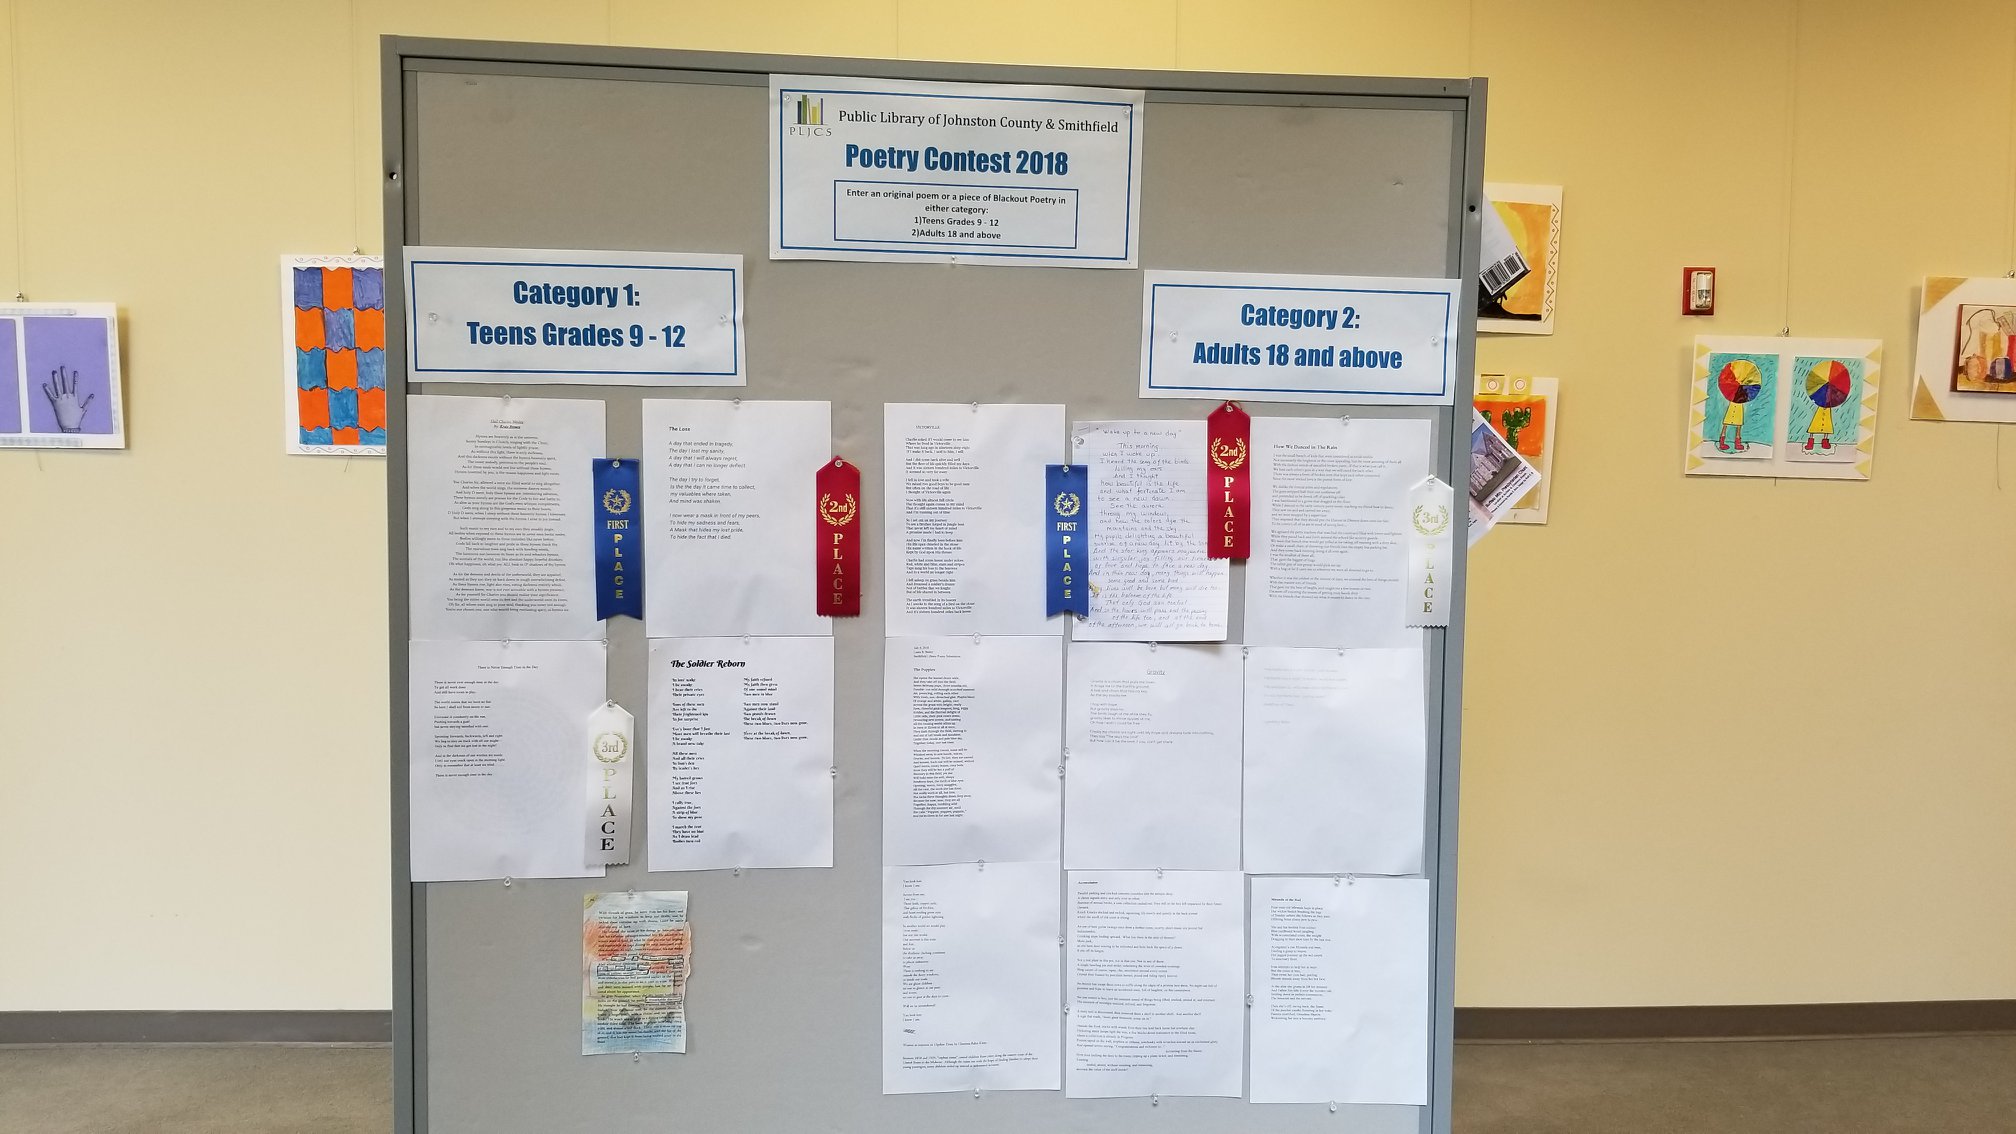 Poetry Contest 2018 winning poems on display. Source: Public Library of Johnston County and Smithfield NC